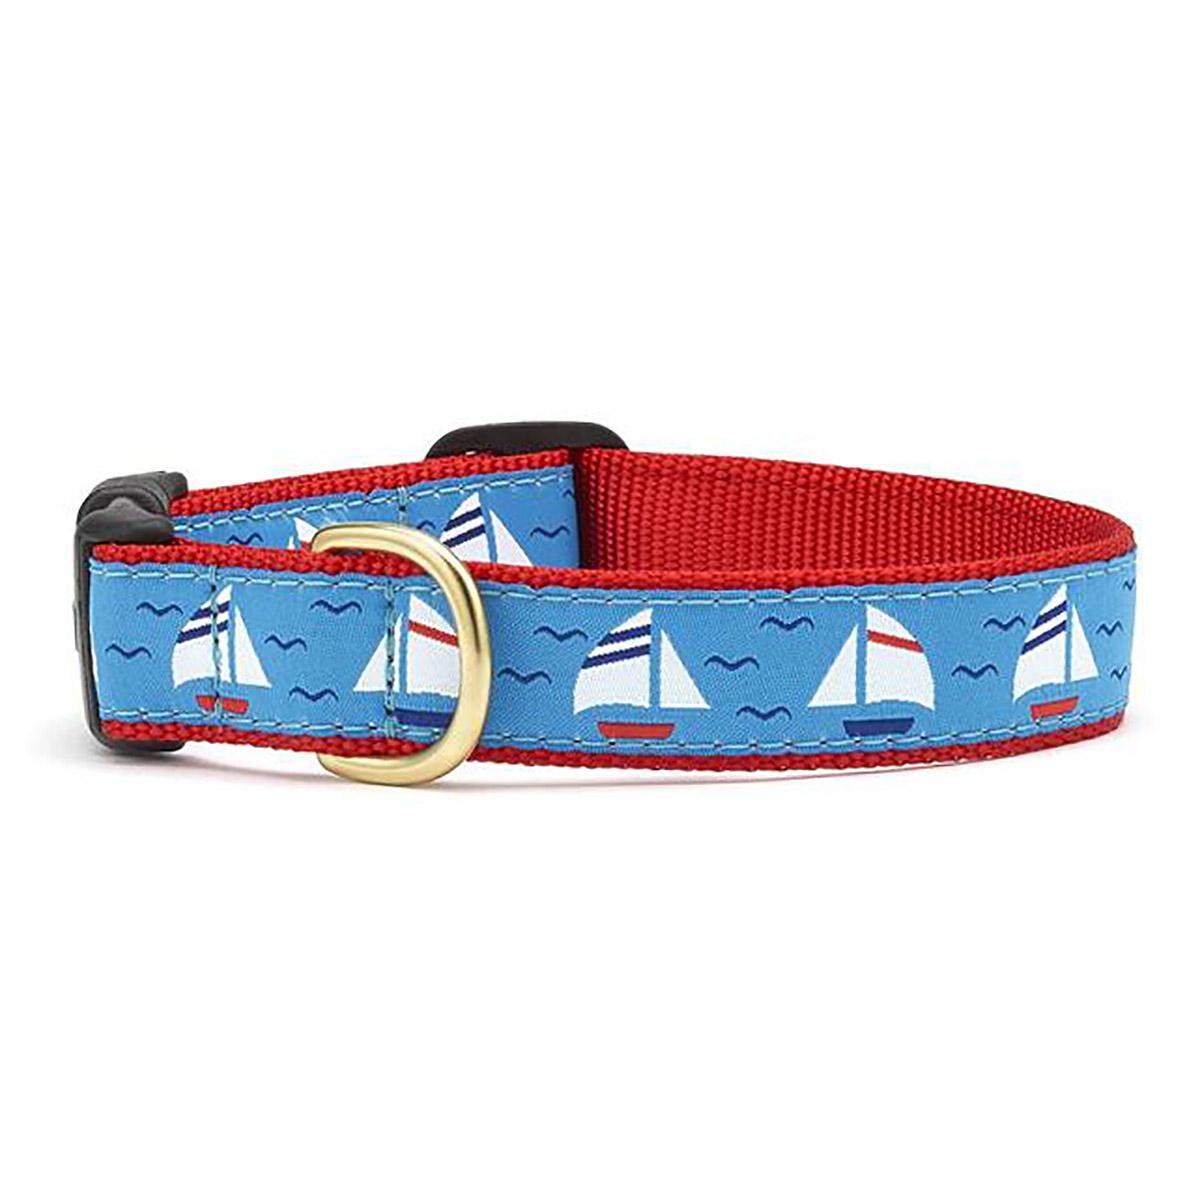 Under Sail Dog Collar by Up Country